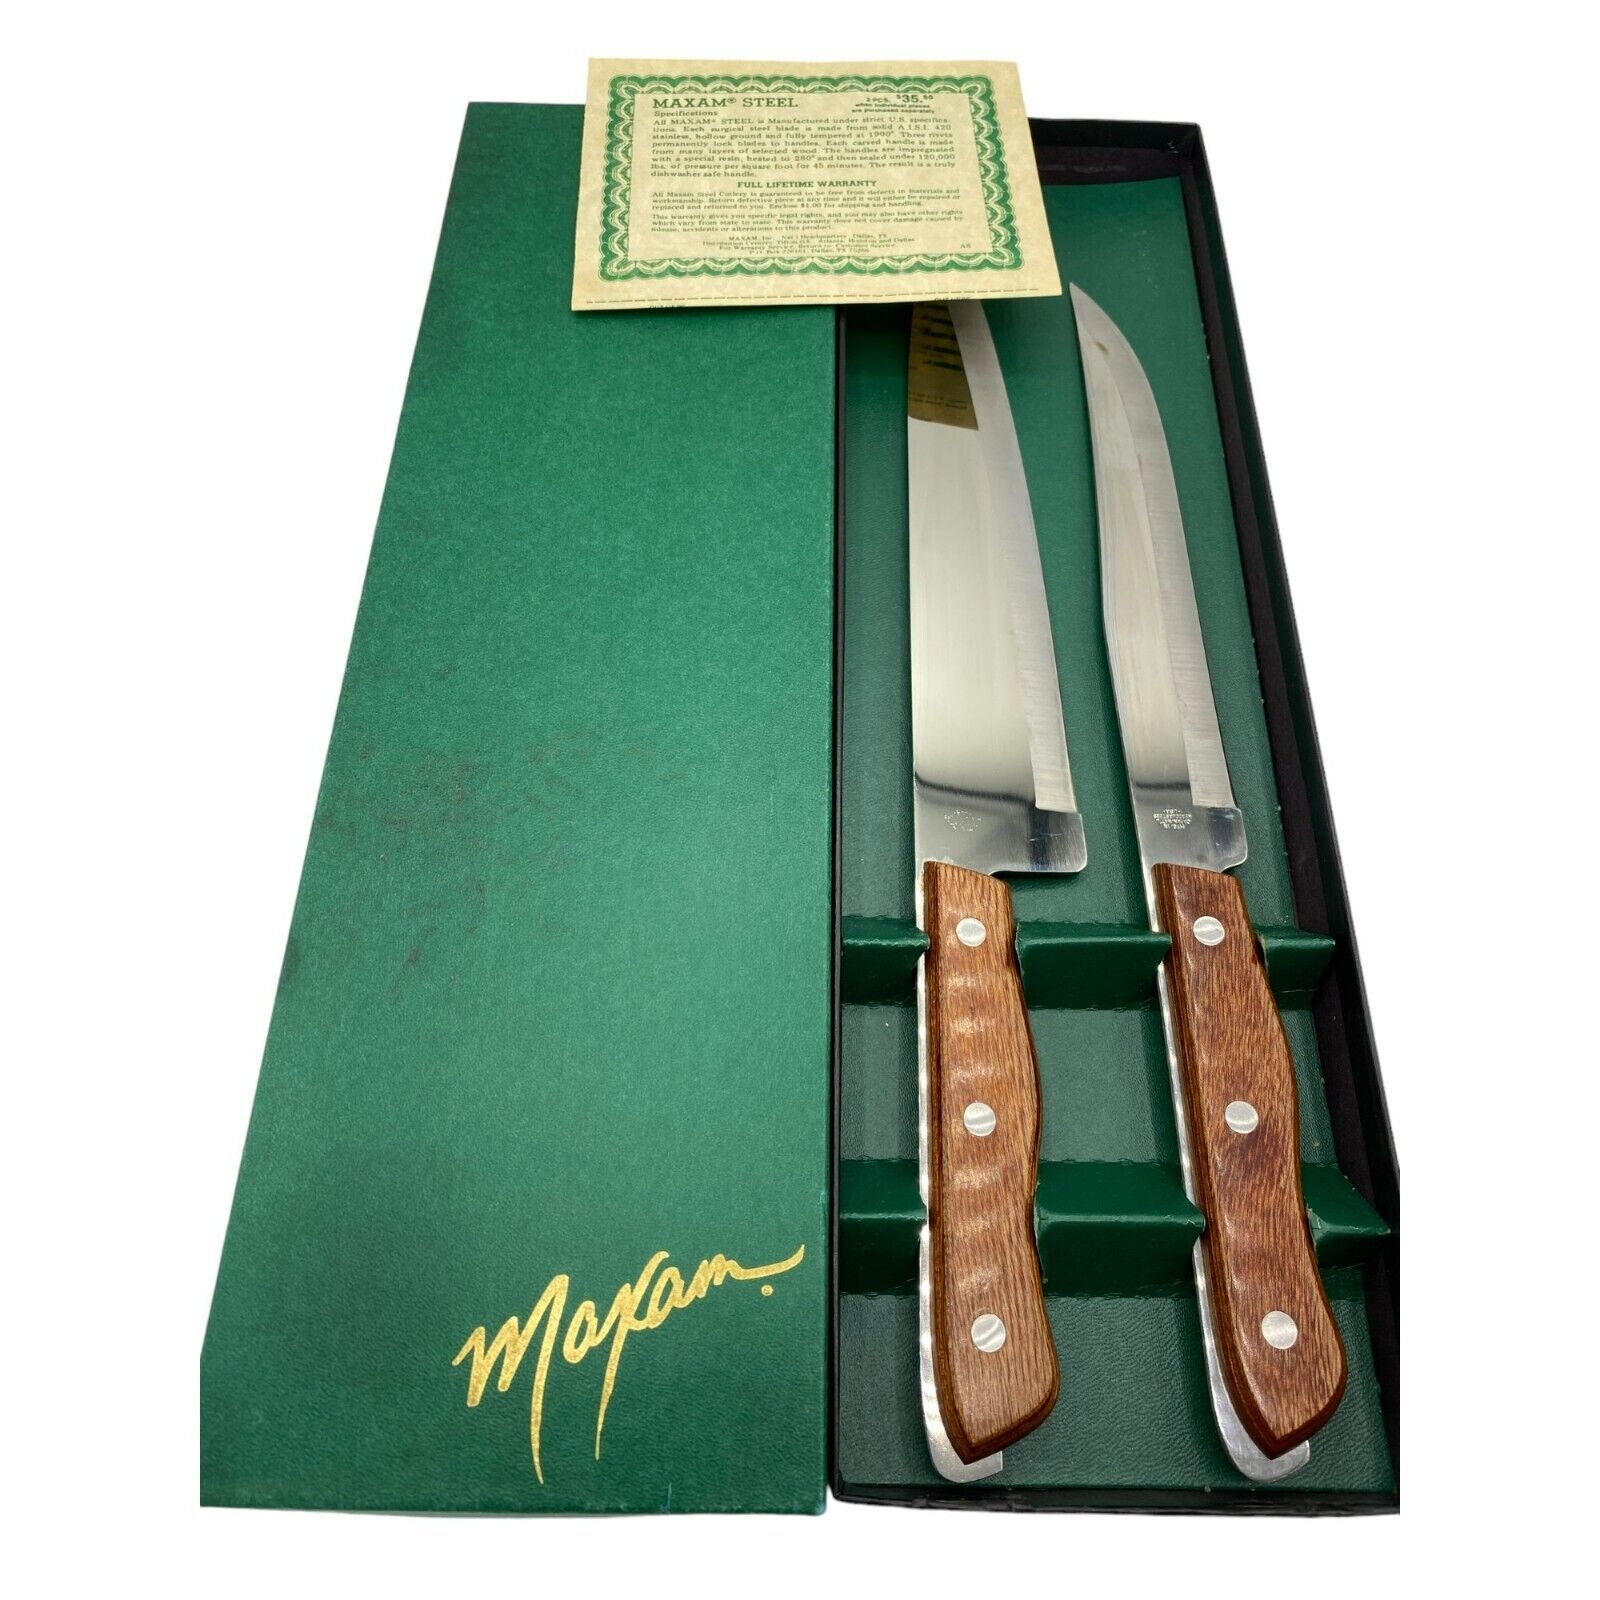 Maxam Precision Hollow Ground Fine Stainless-Steel Chef and Carving Knife - $19.79